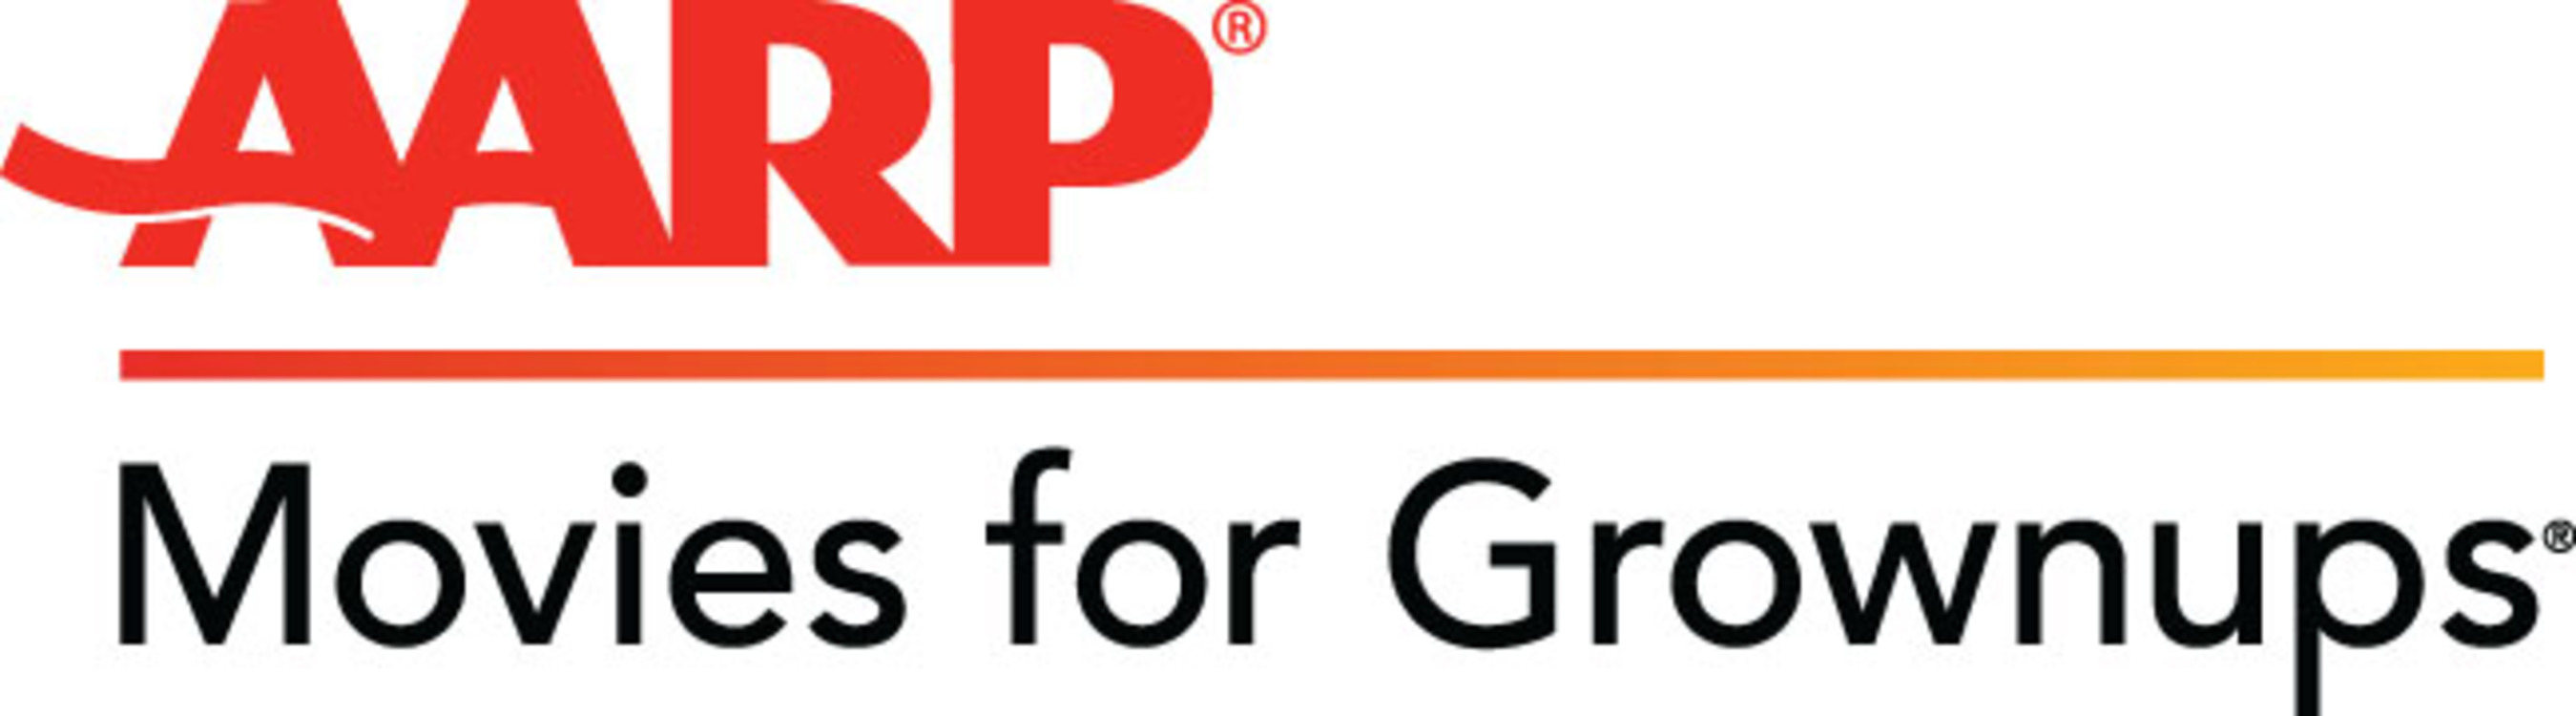 Movies For Grownups logo